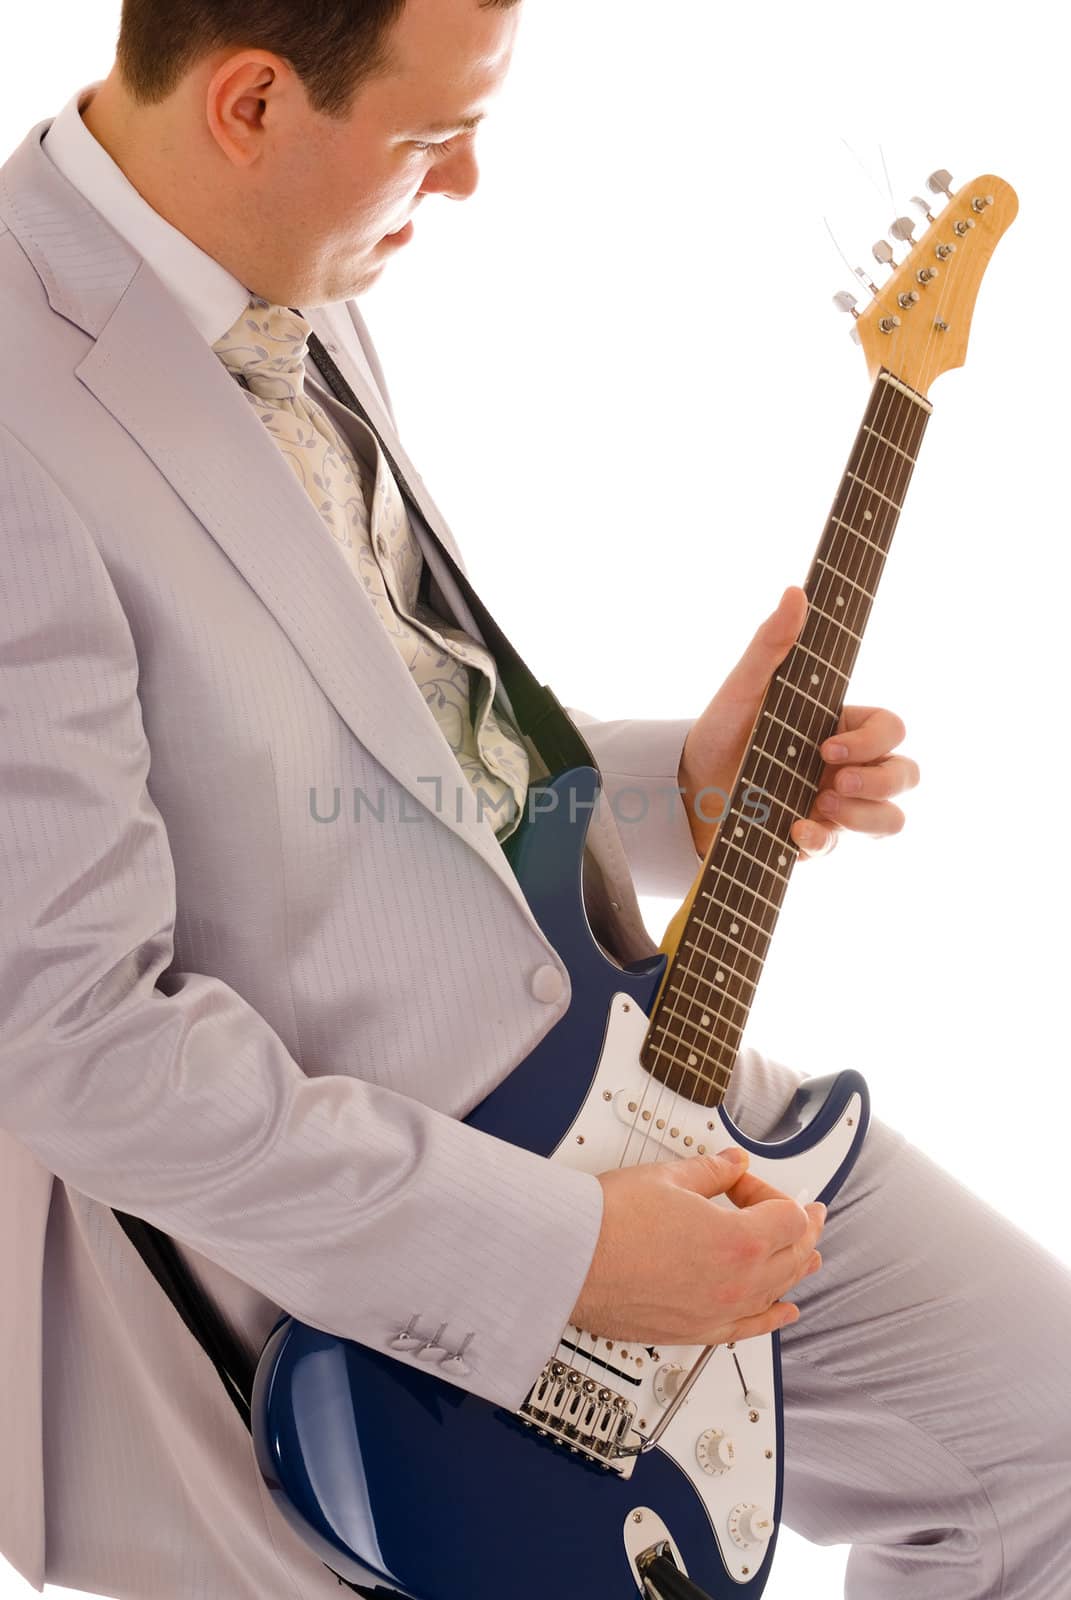 man in white suit playing guitar, white background